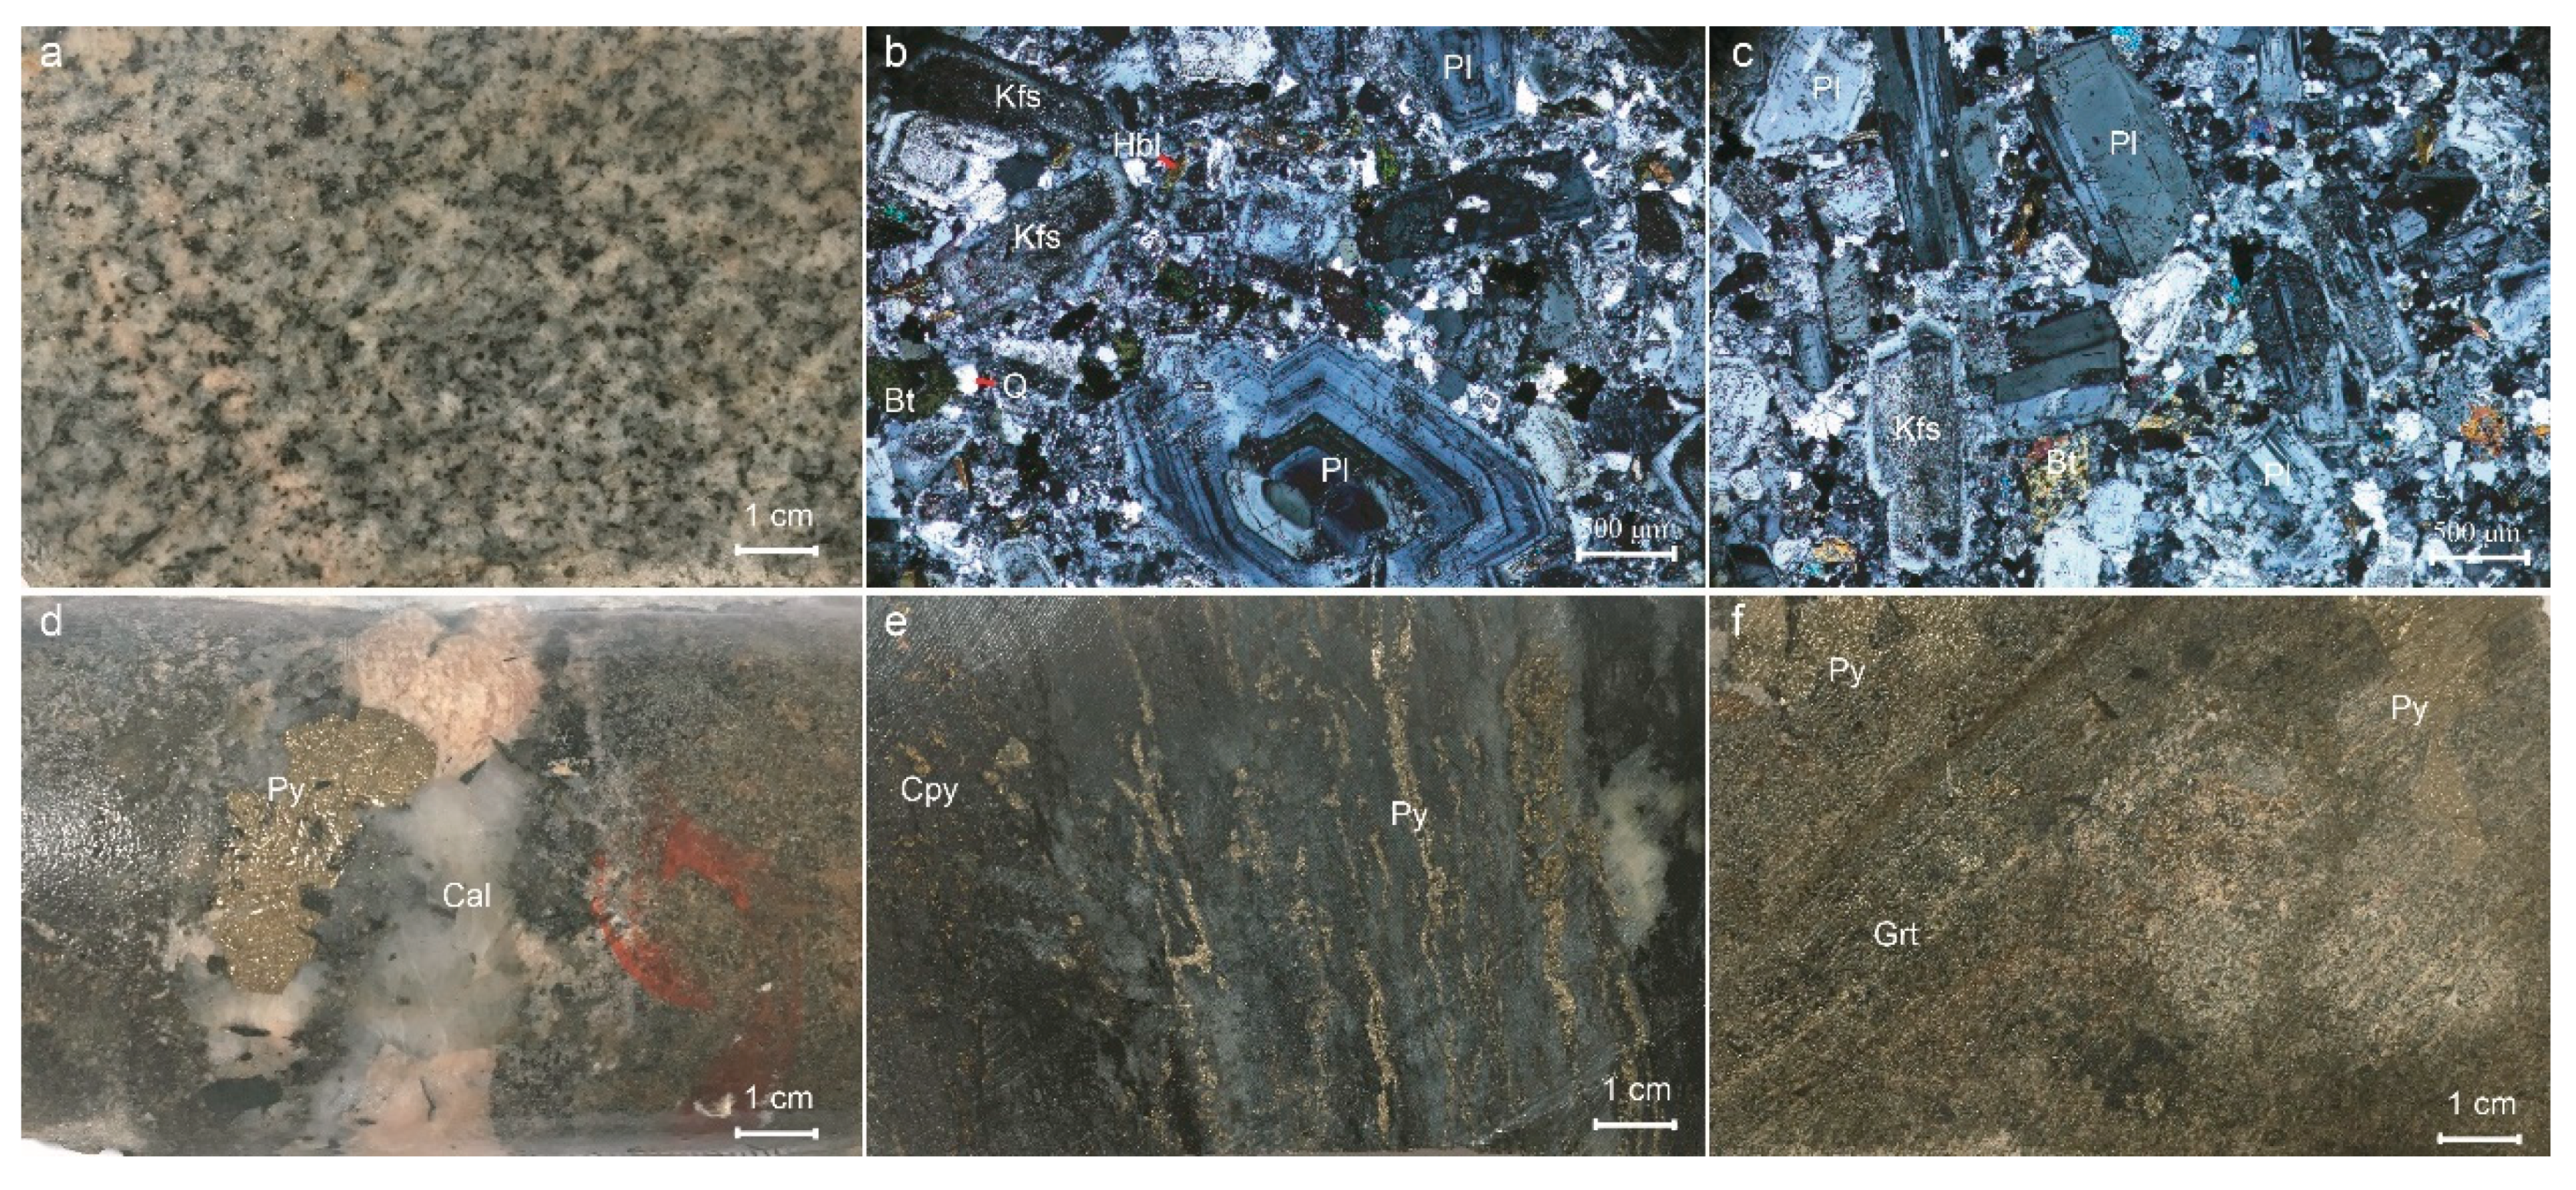 Minerals | Free Full-Text | Geochemical Study of Cretaceous Magmatic Rocks  and Related Ores of the Hucunnan Cu–Mo Deposit: Implications for  Petrogenesis and Poly-Metal Mineralization in the Tongling Ore-Cluster  Region | HTML